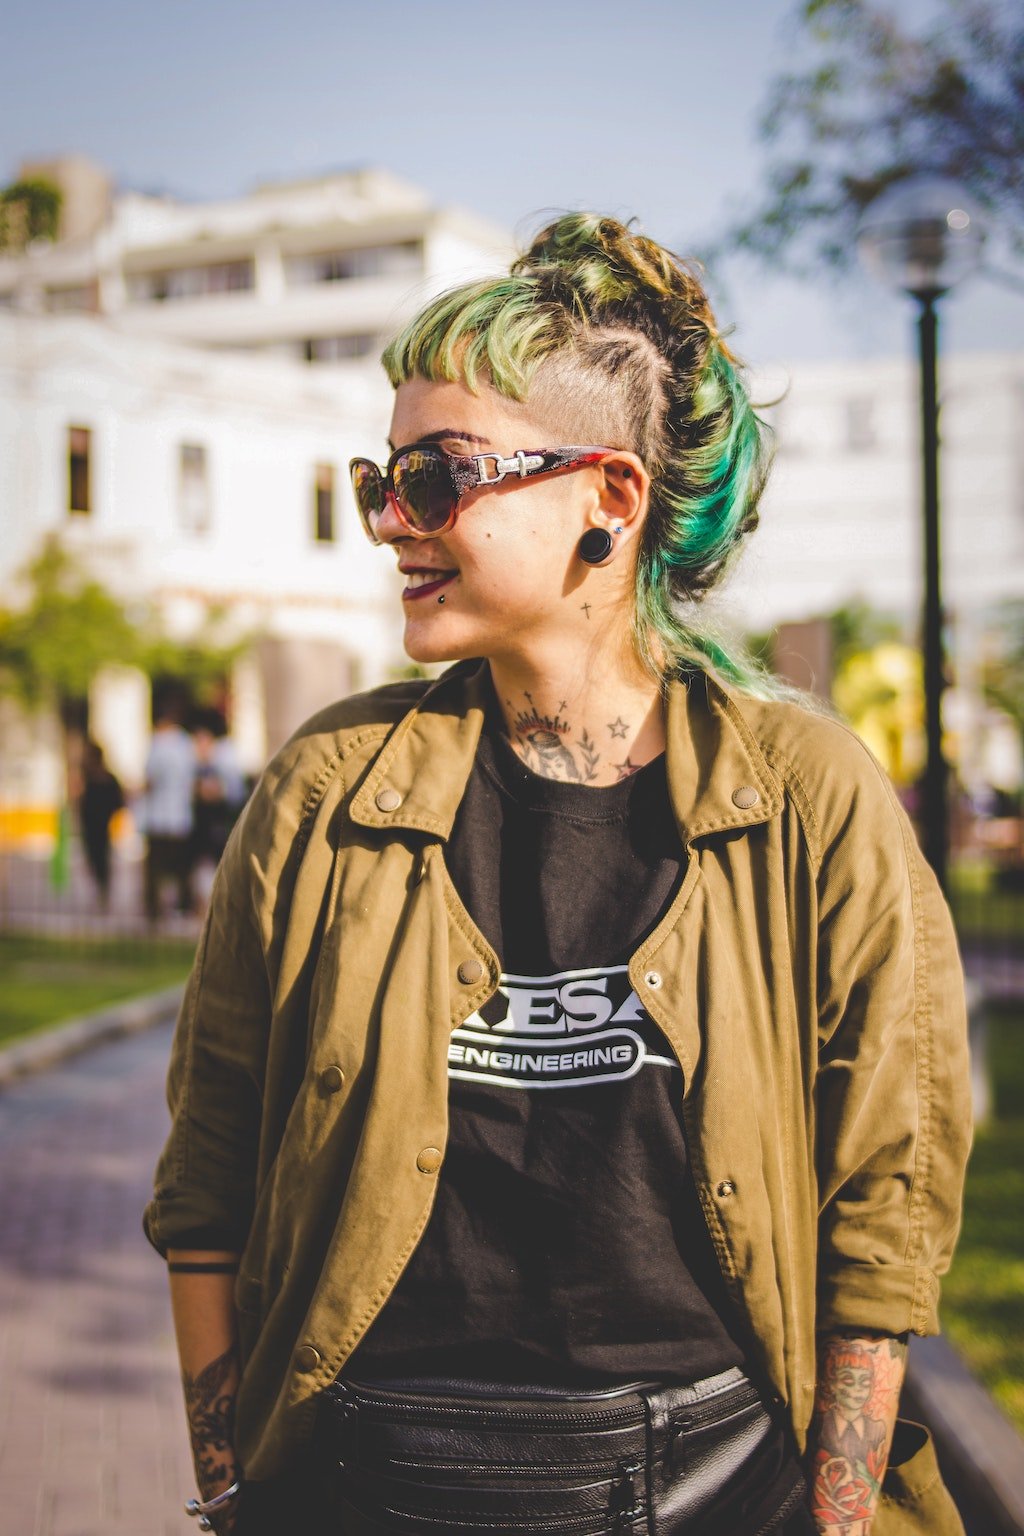 A Woman with Many Tattoos and piercings